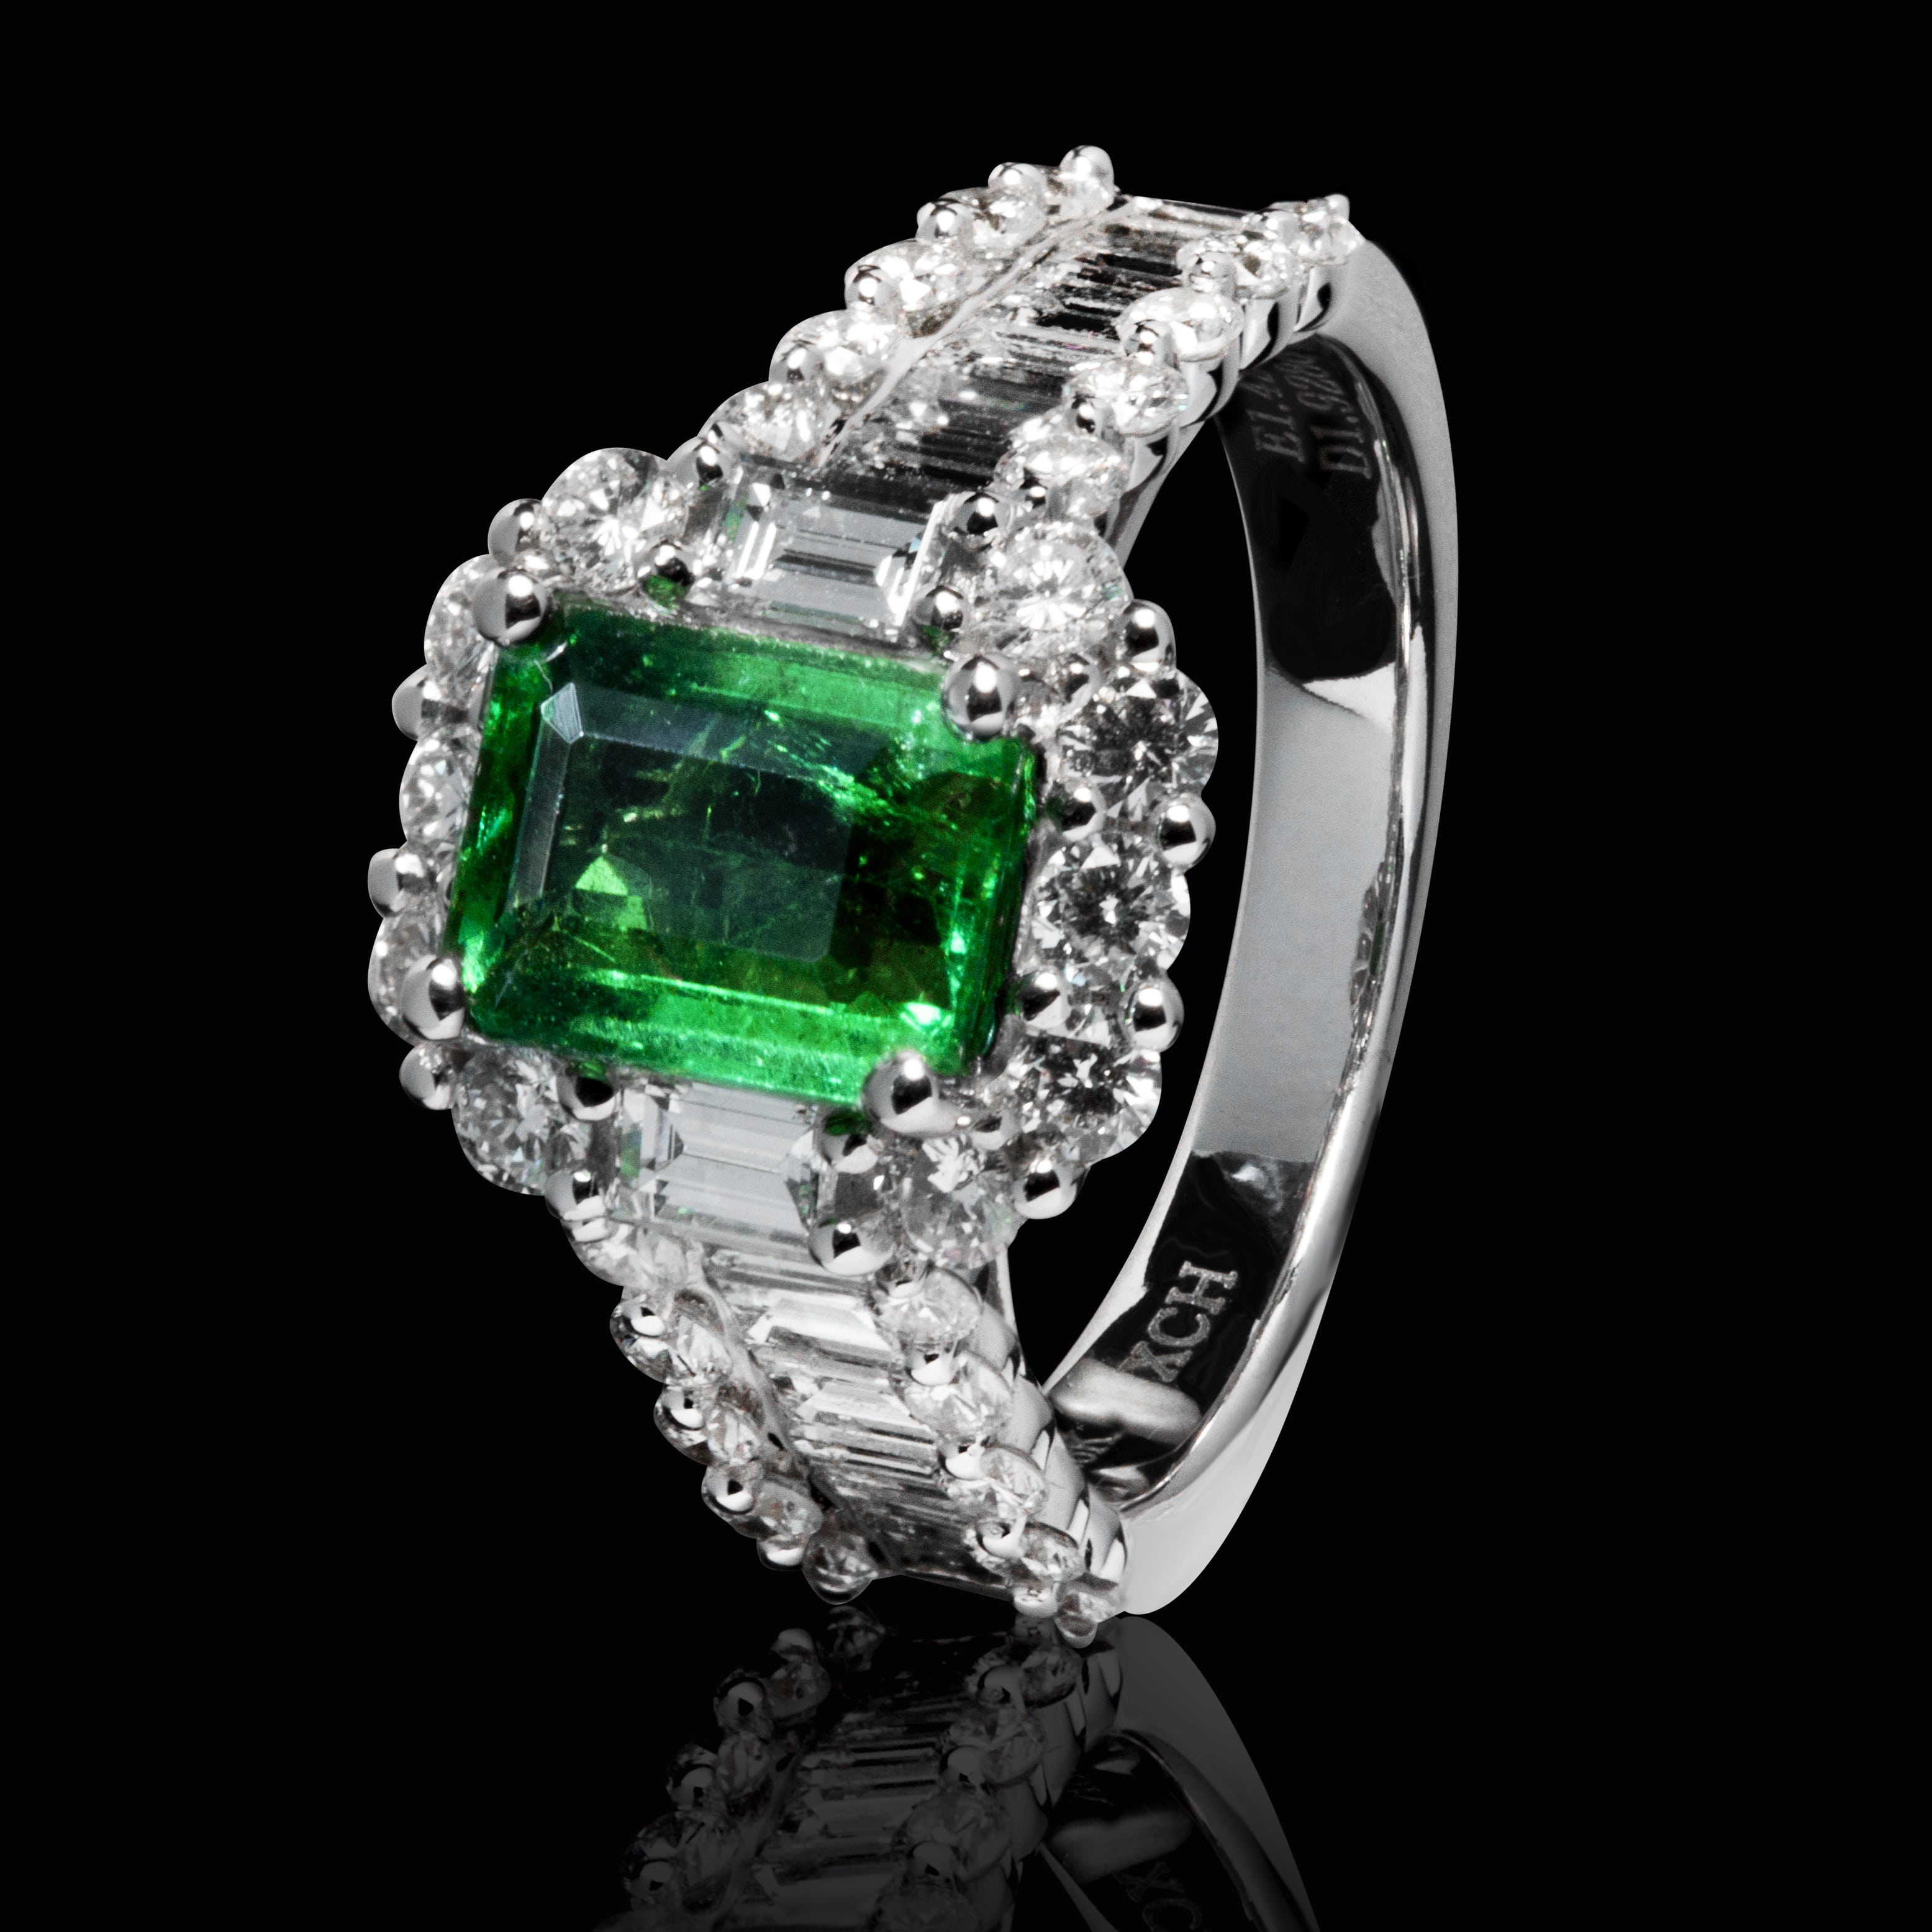 silver-colored ring with clear and green gemstones, emerald, luxury